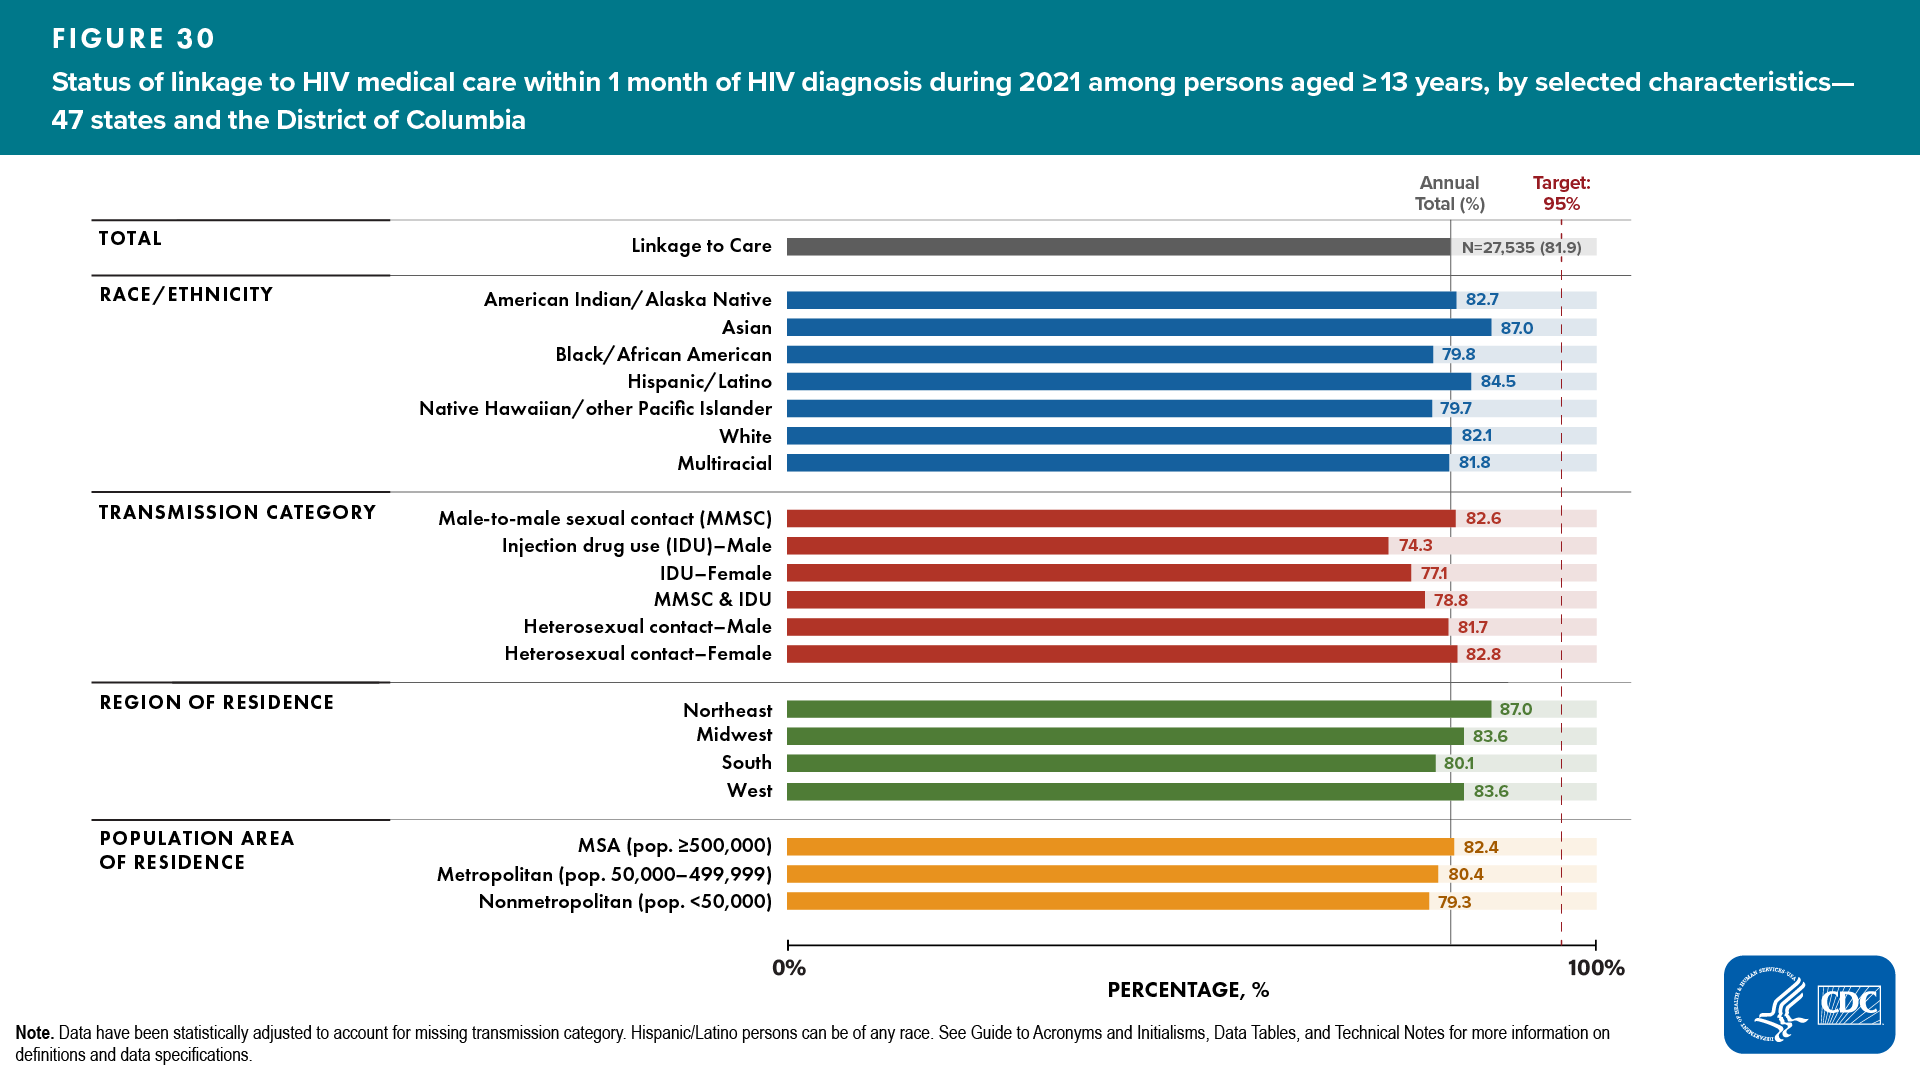 Figure 30. Status of linkage to HIV medical care within 1 month of HIV diagnosis during 2021 among persons aged ≥13 years, by selected characteristics — 47 states and the District of Columbia